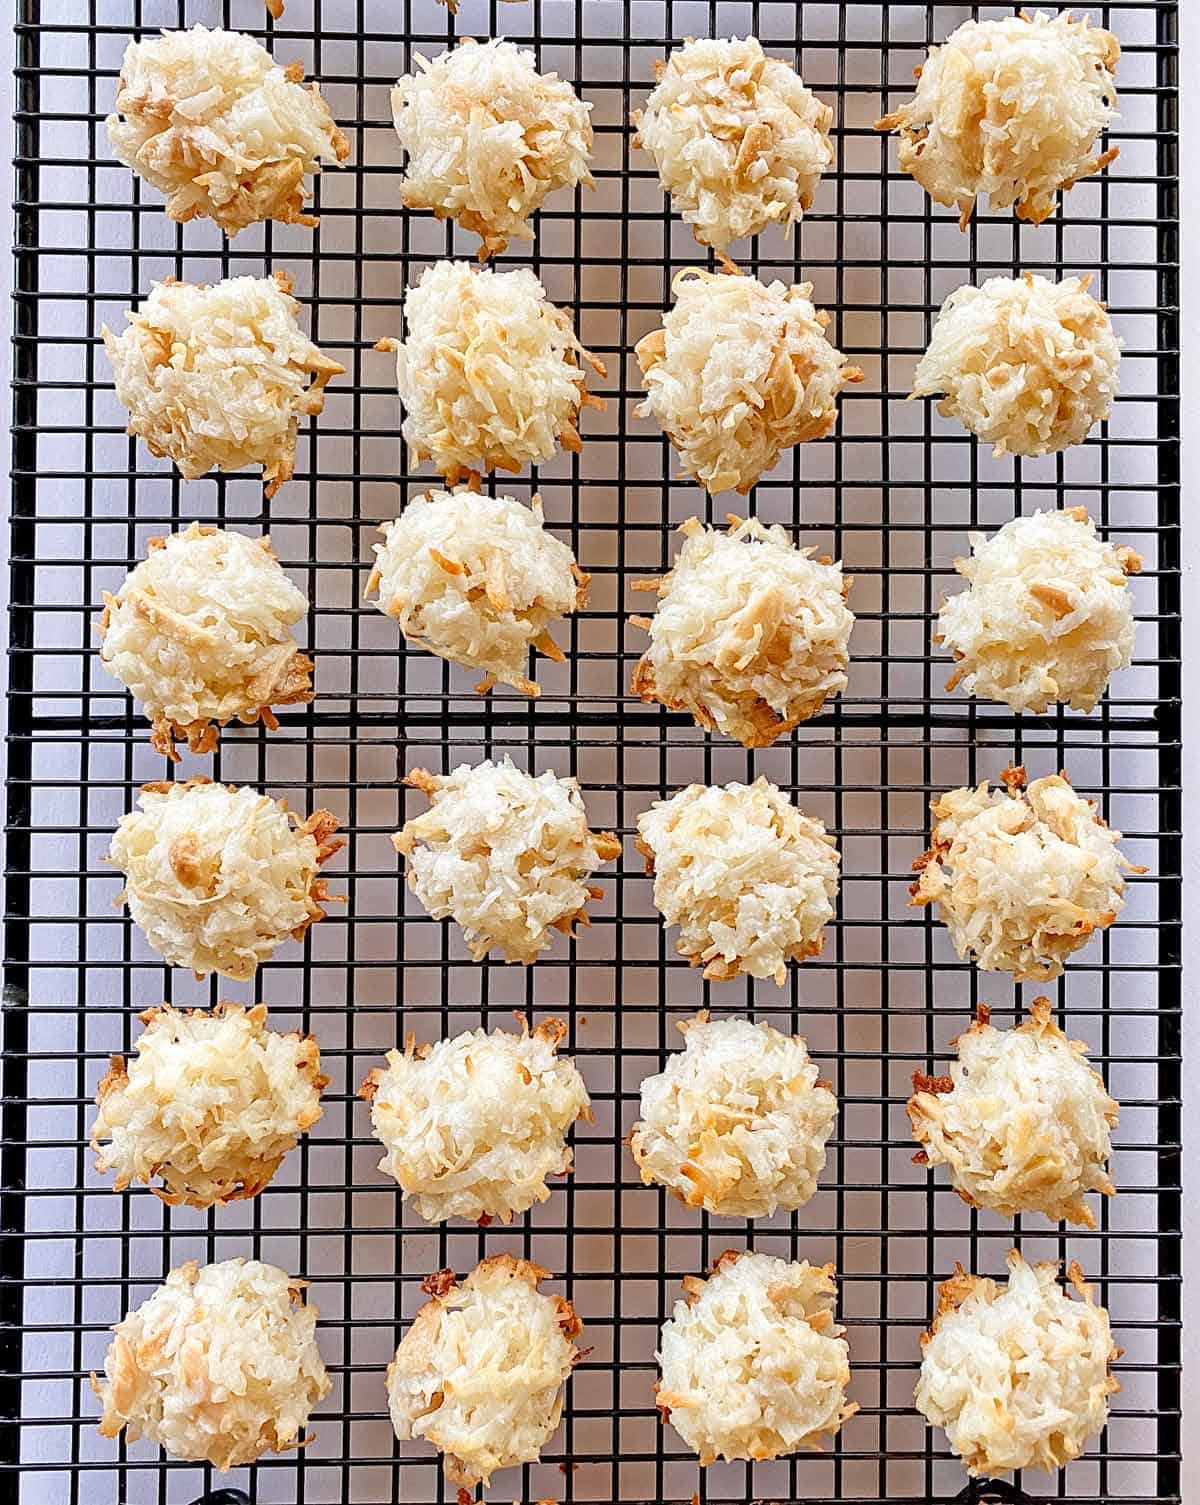 Baked coconut almond macaroons on a wire cooling rack.